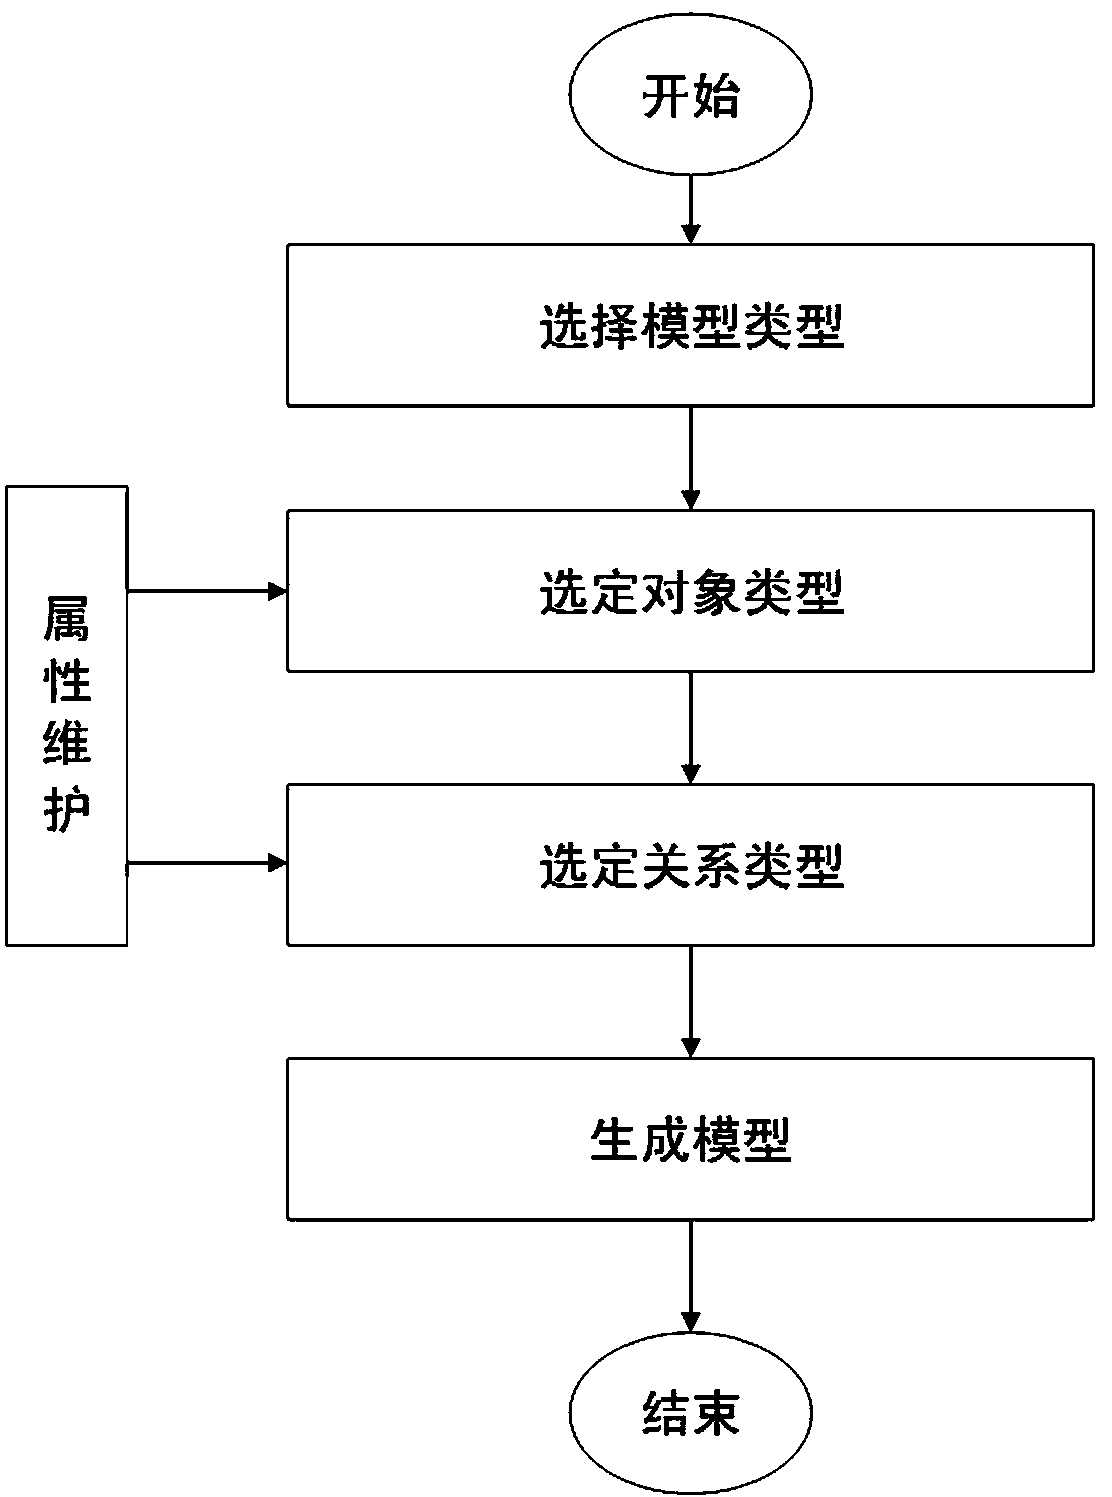 Computer modeling method of full operation flow based on structuralization